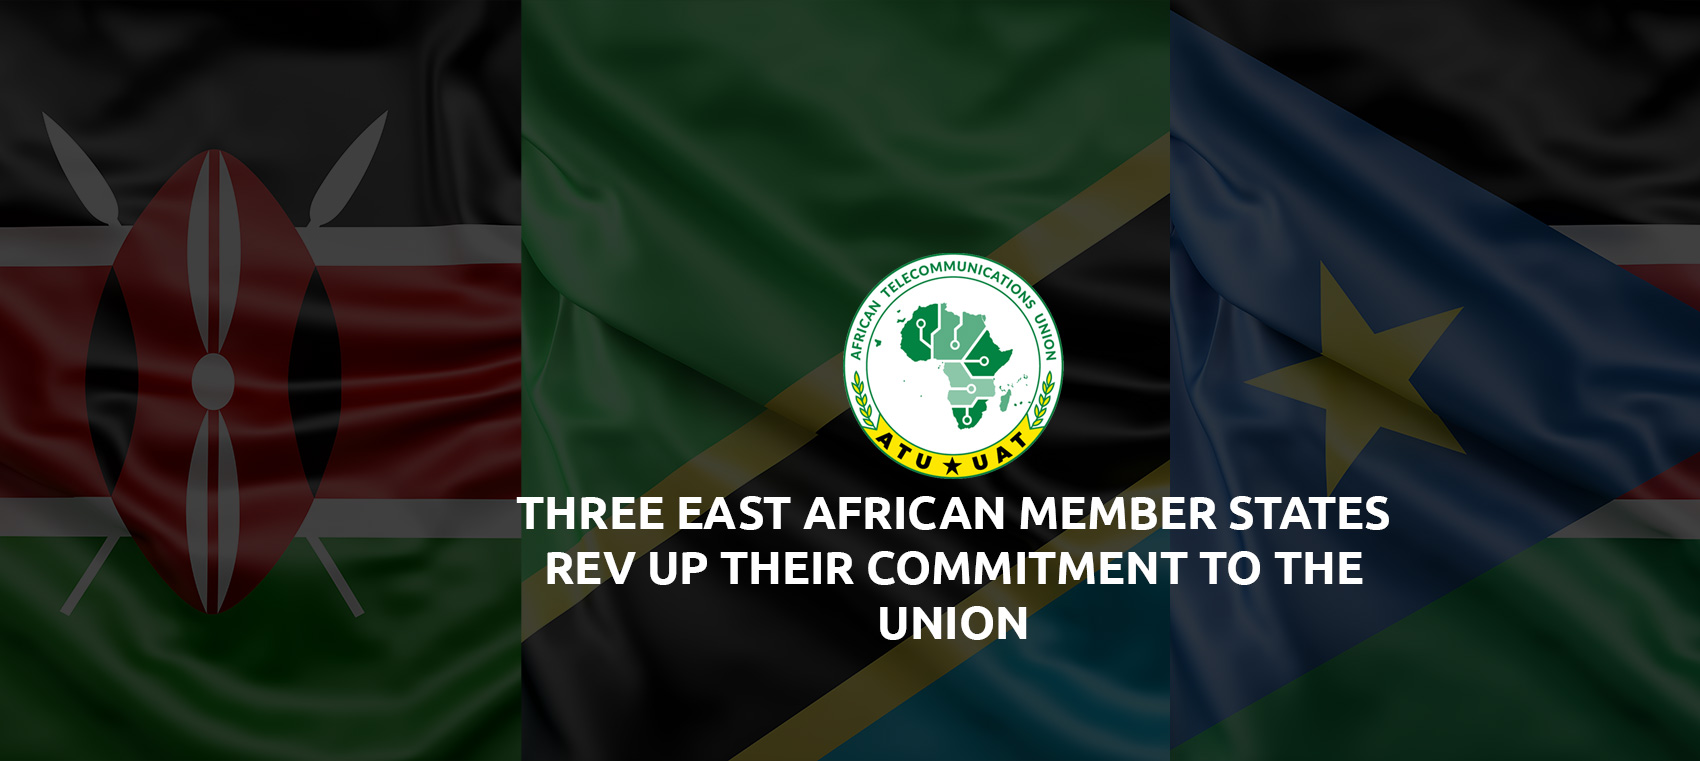 THREE EAST AFRICAN MEMBER STATES REV UP THEIR COMMITMENT TO THE UNION